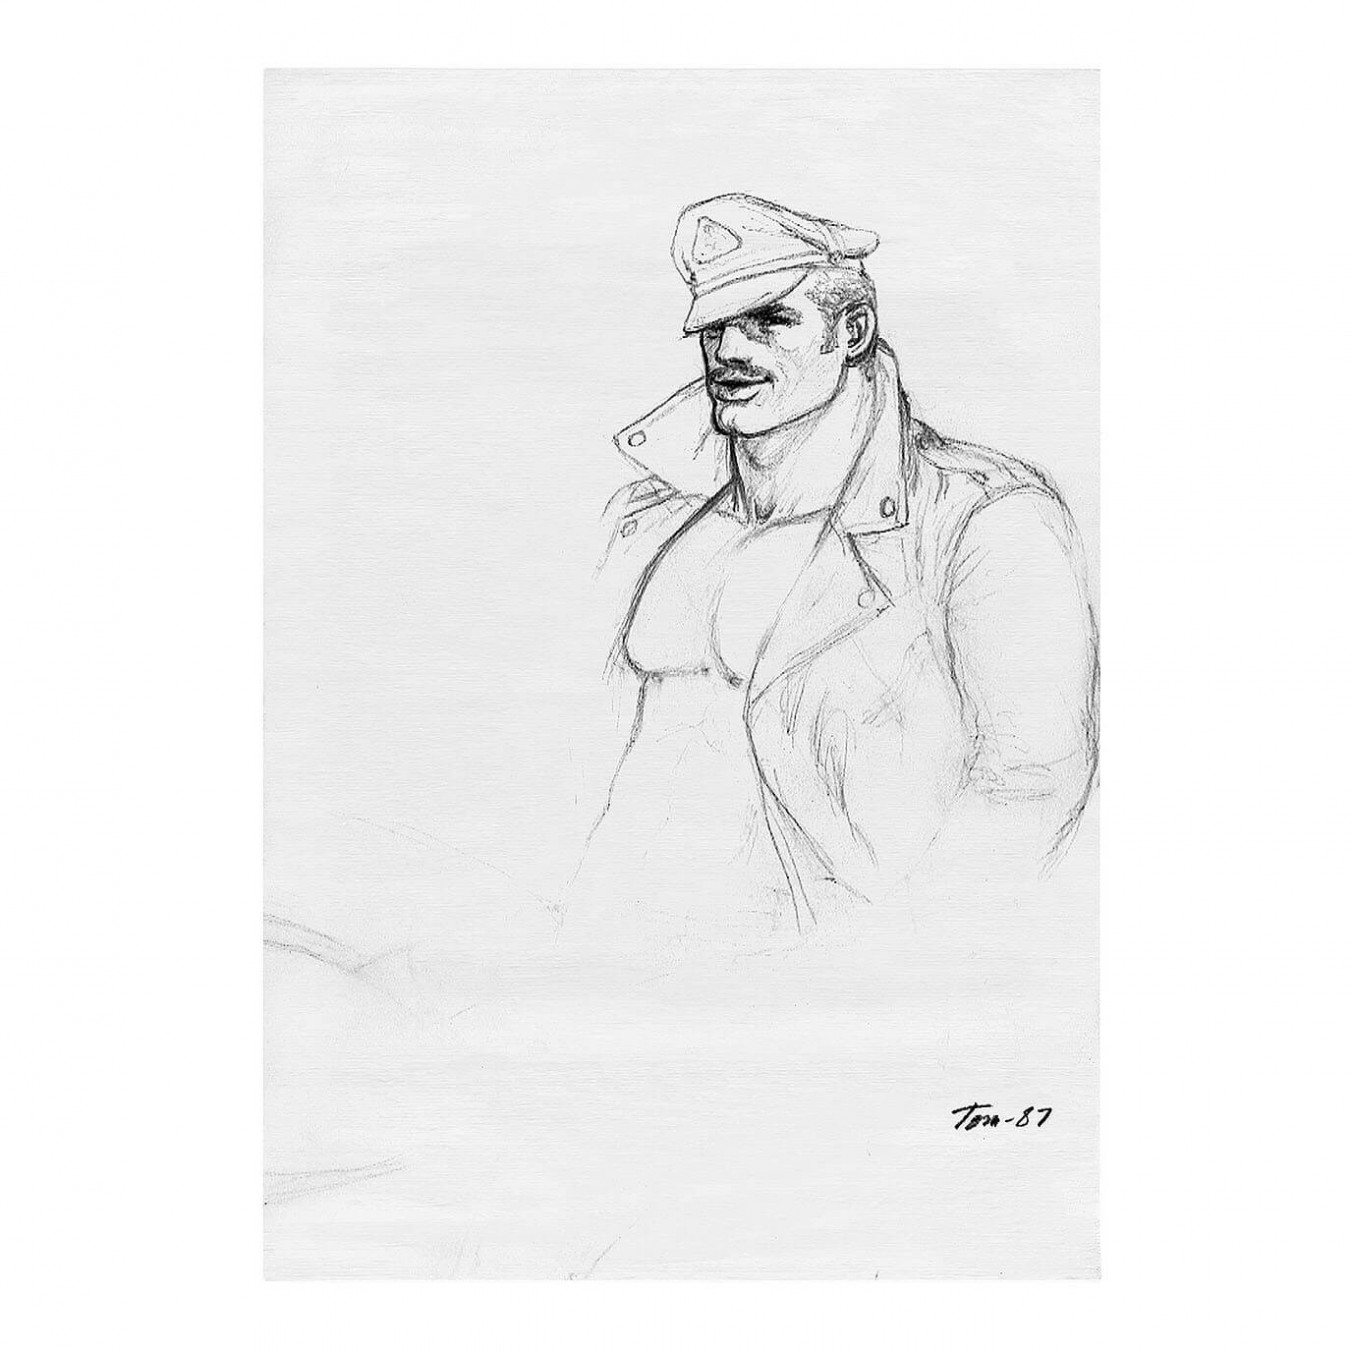 TOM OF FINLAND - Untitled, 1987